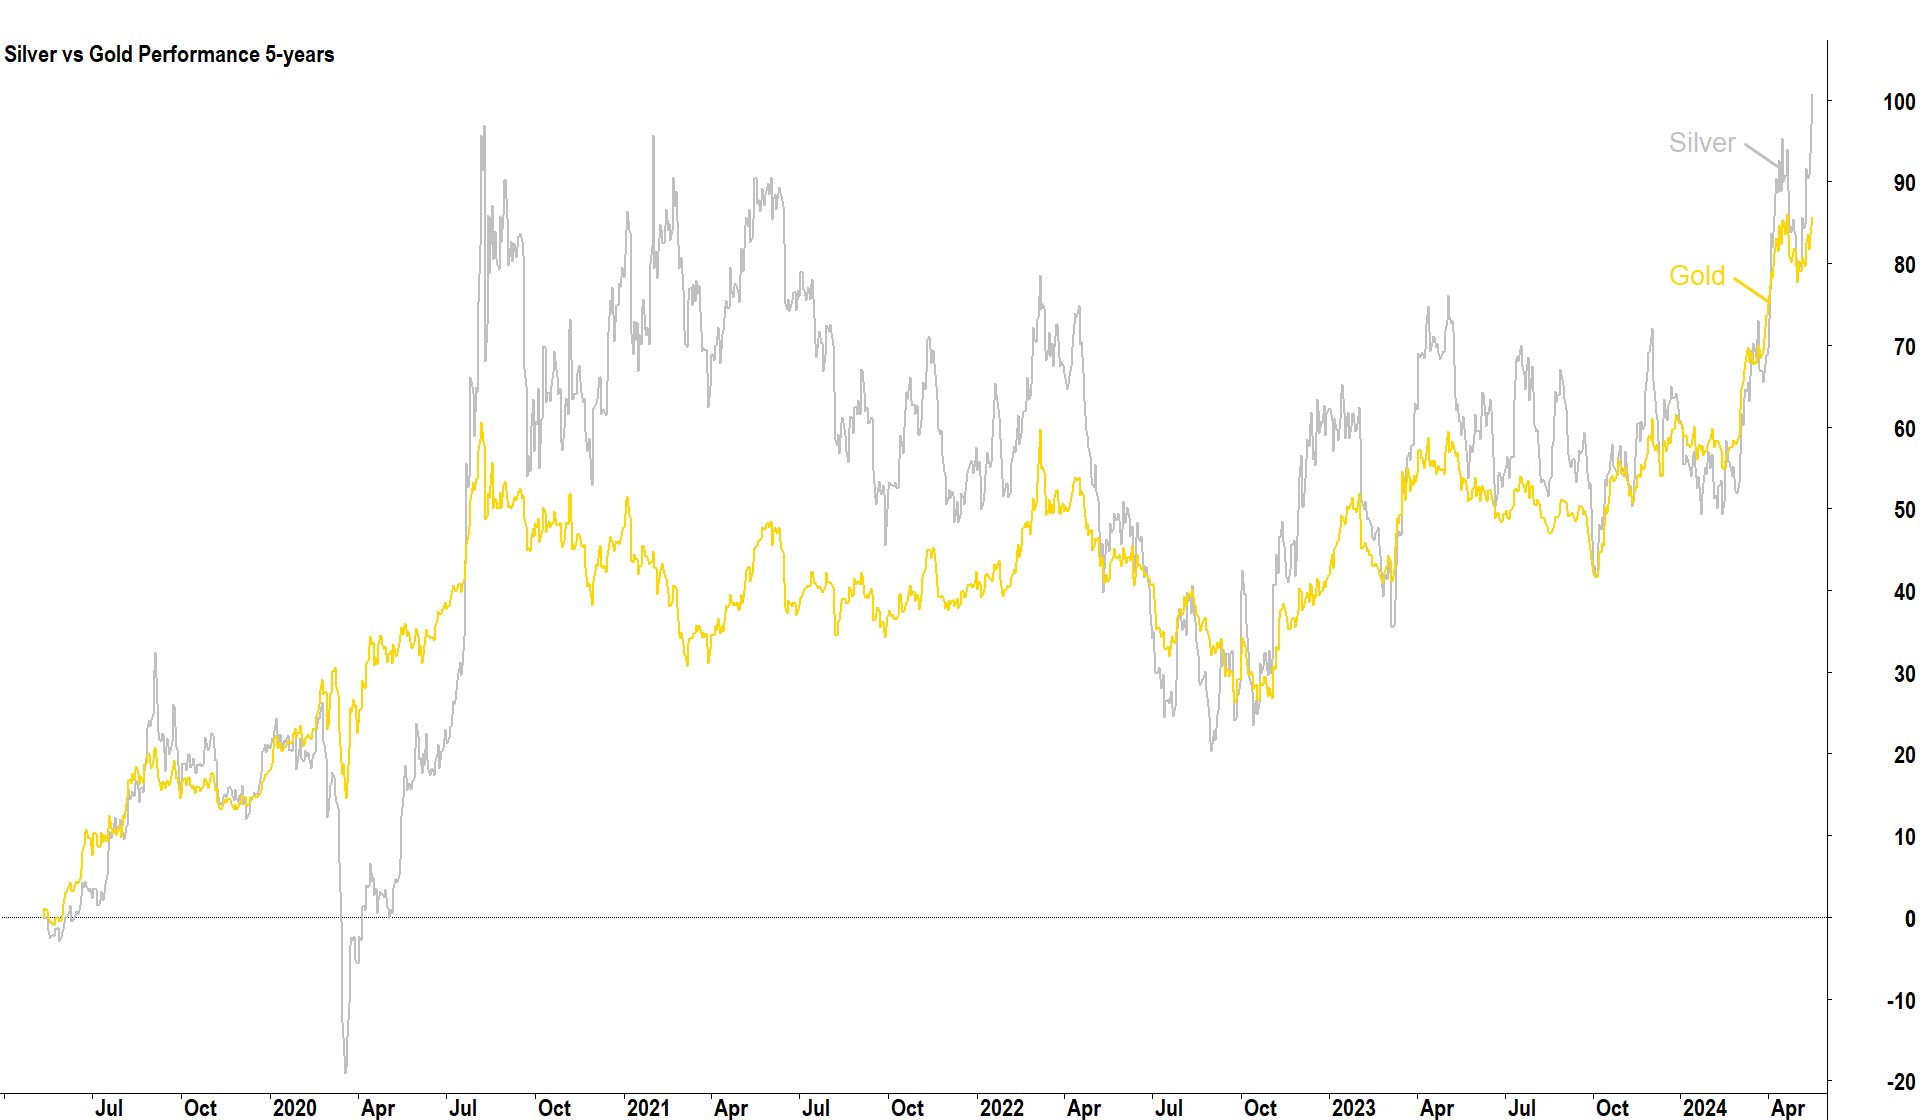 Silver vs Gold Price Performance 5-years